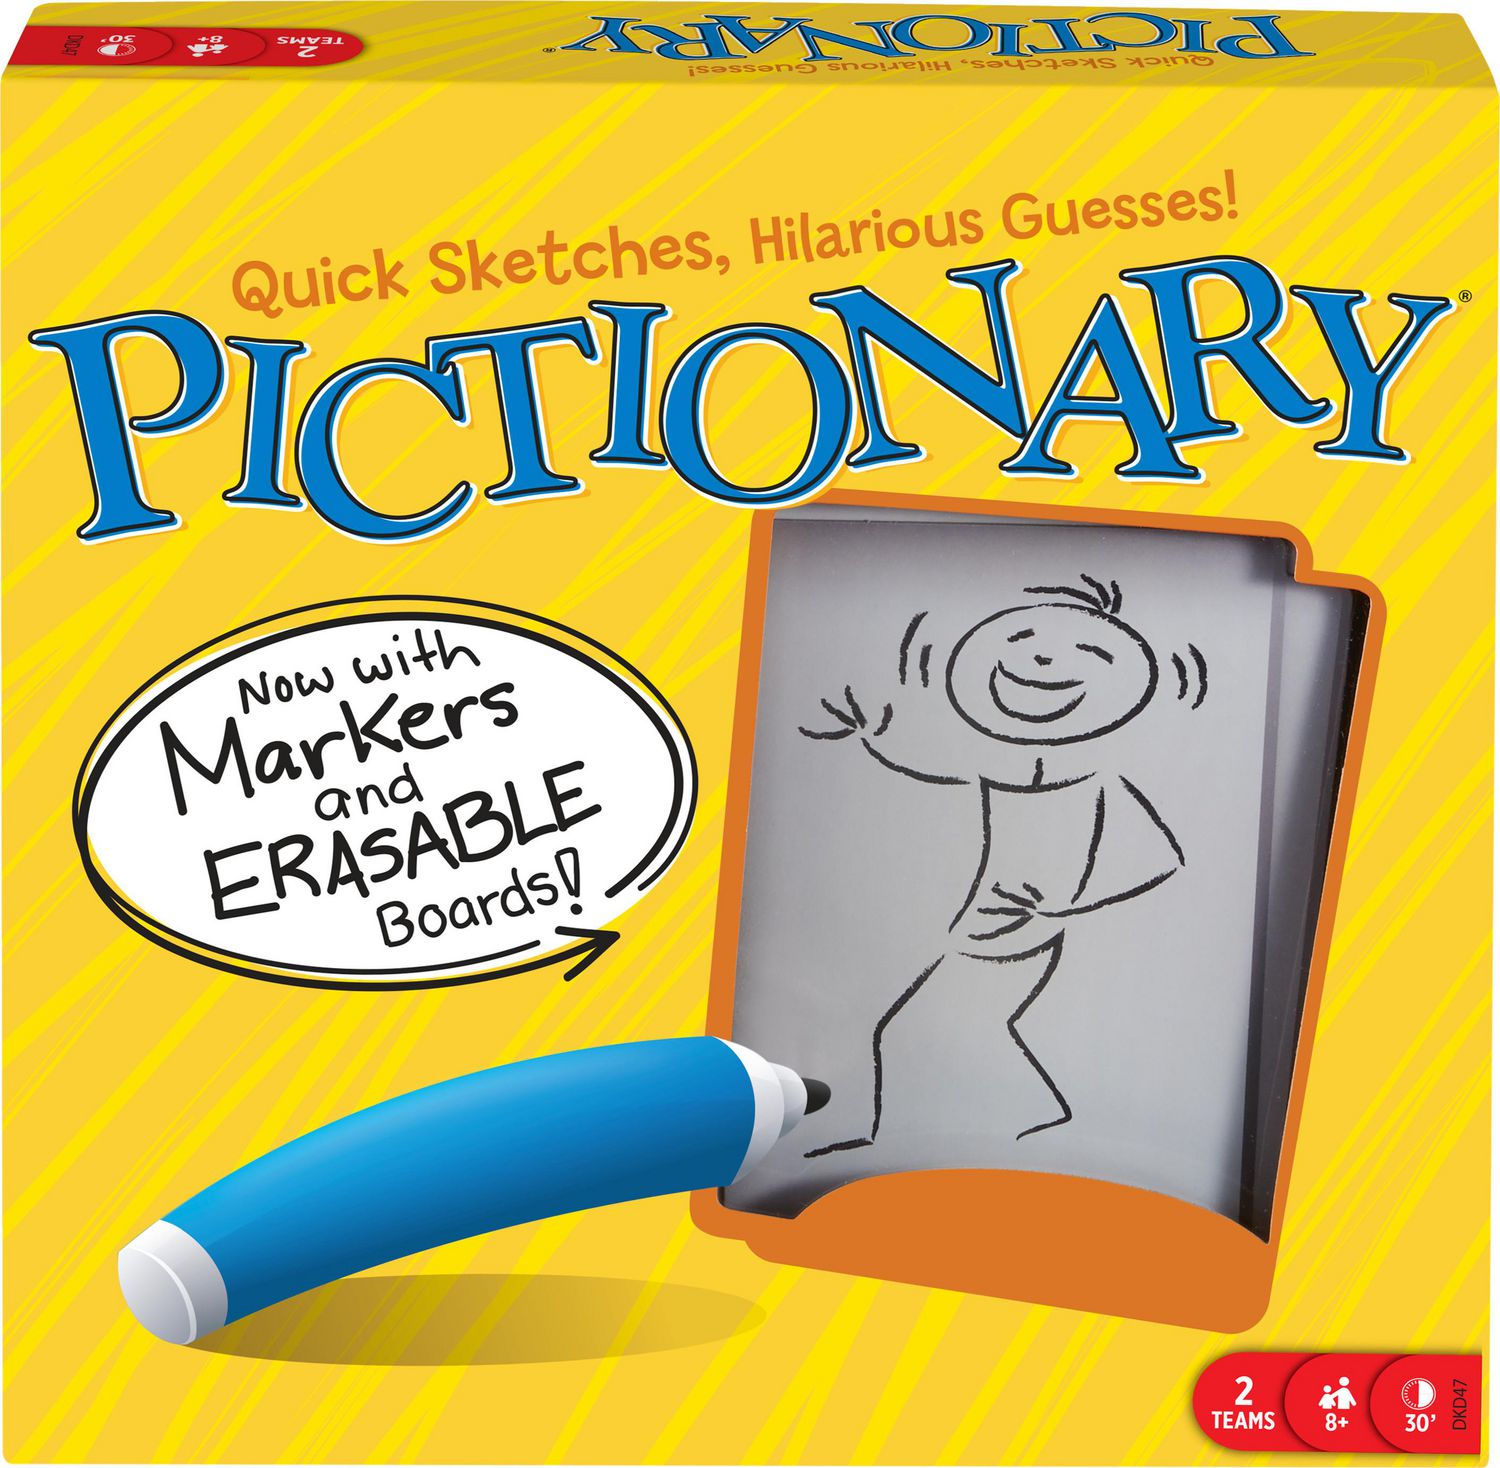 Pictionary Frame Game Family Fun Ages 8+ Timer, Pen and Clue Cards Play 3  Ways